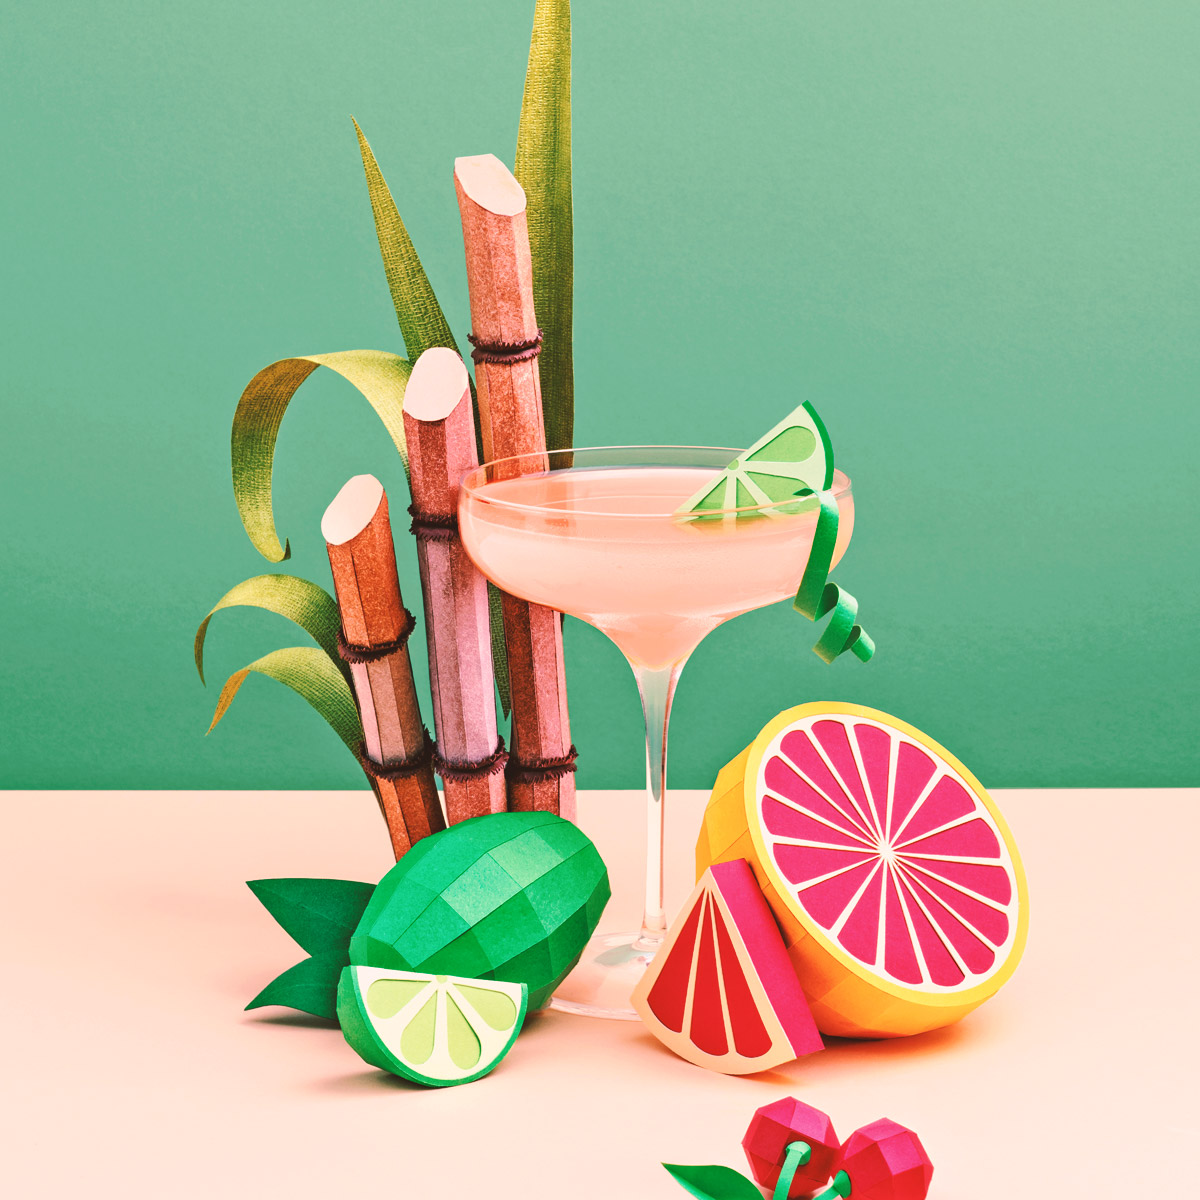 Pause Apéro Paper Illustrations of the Hottest Summer Cocktails by Get It Studio